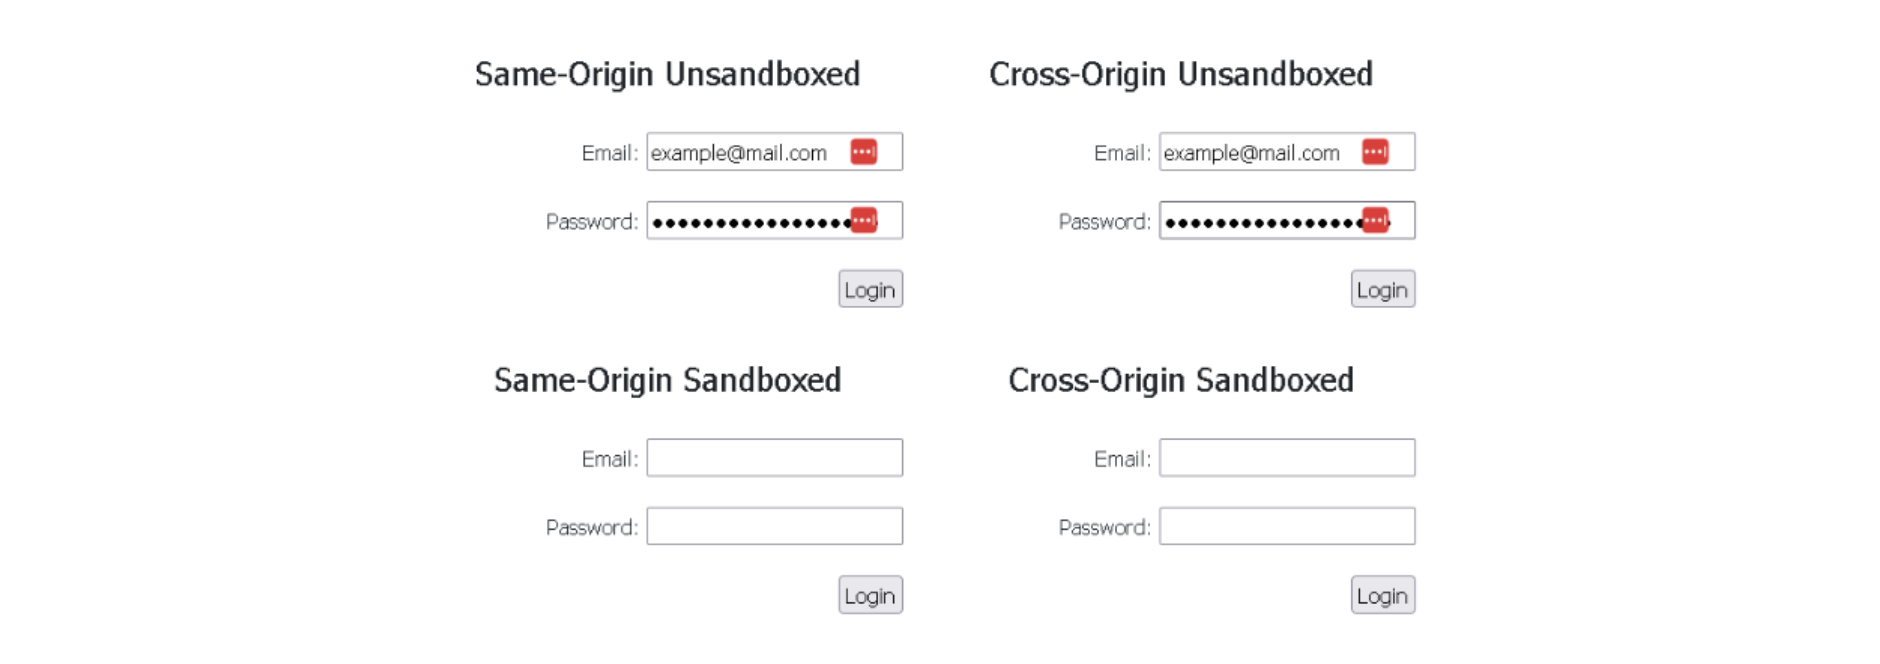 LastPass-extension-filling-same-origin-and-cross-origin-iFrames-if-the-user-consents